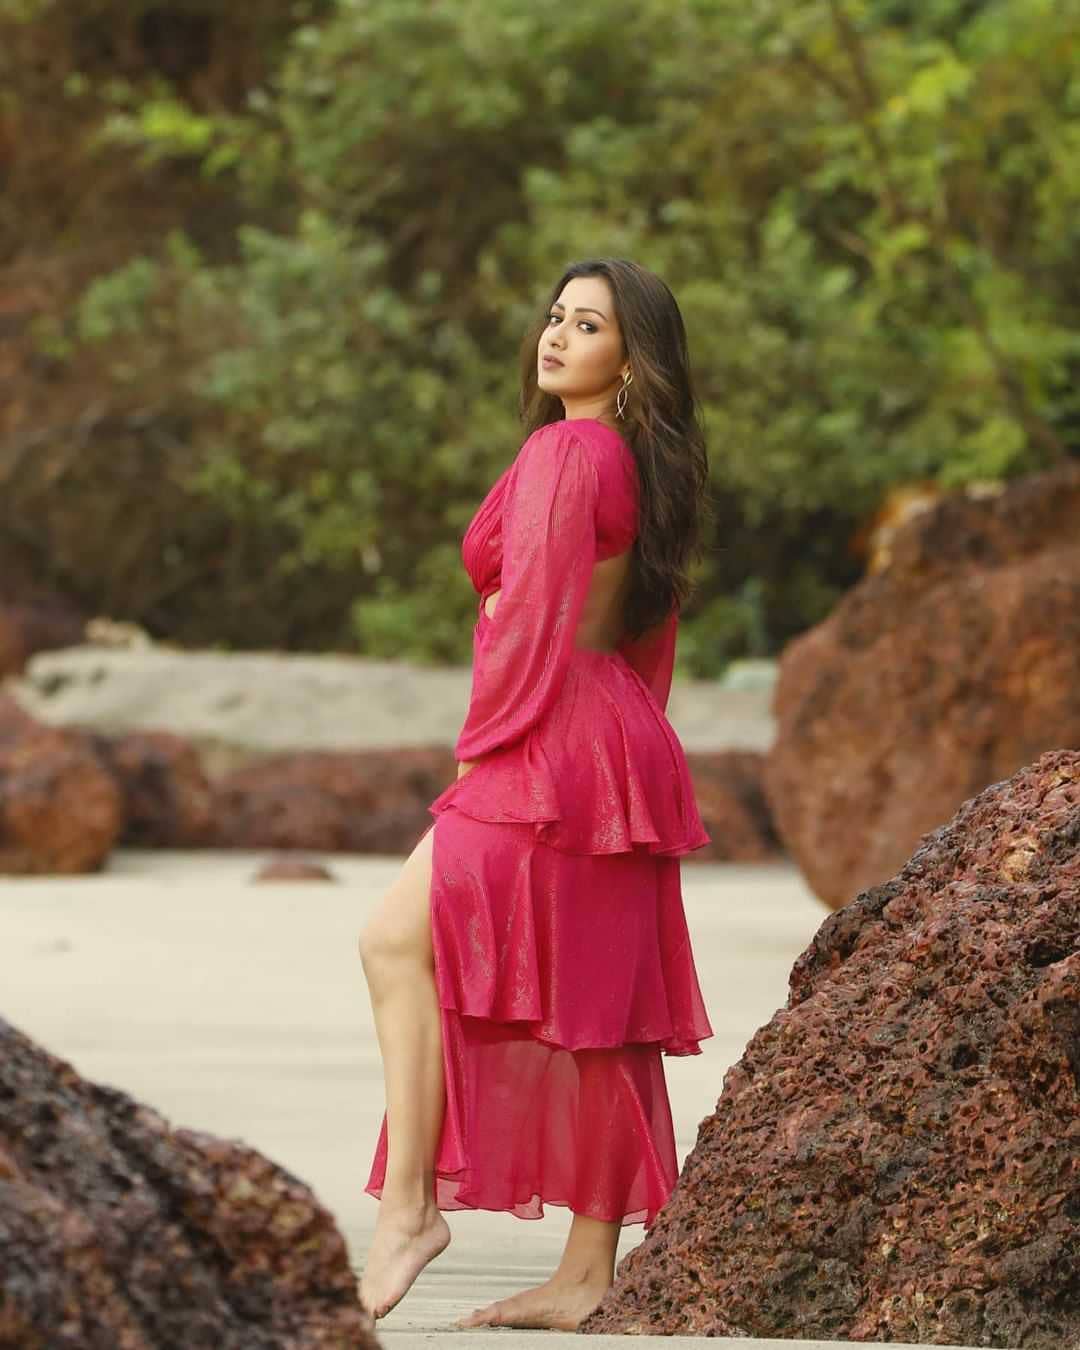 Catherine Tresa Alexander Photoshoot in Stylish Pink Outfit at Beach, December 2021